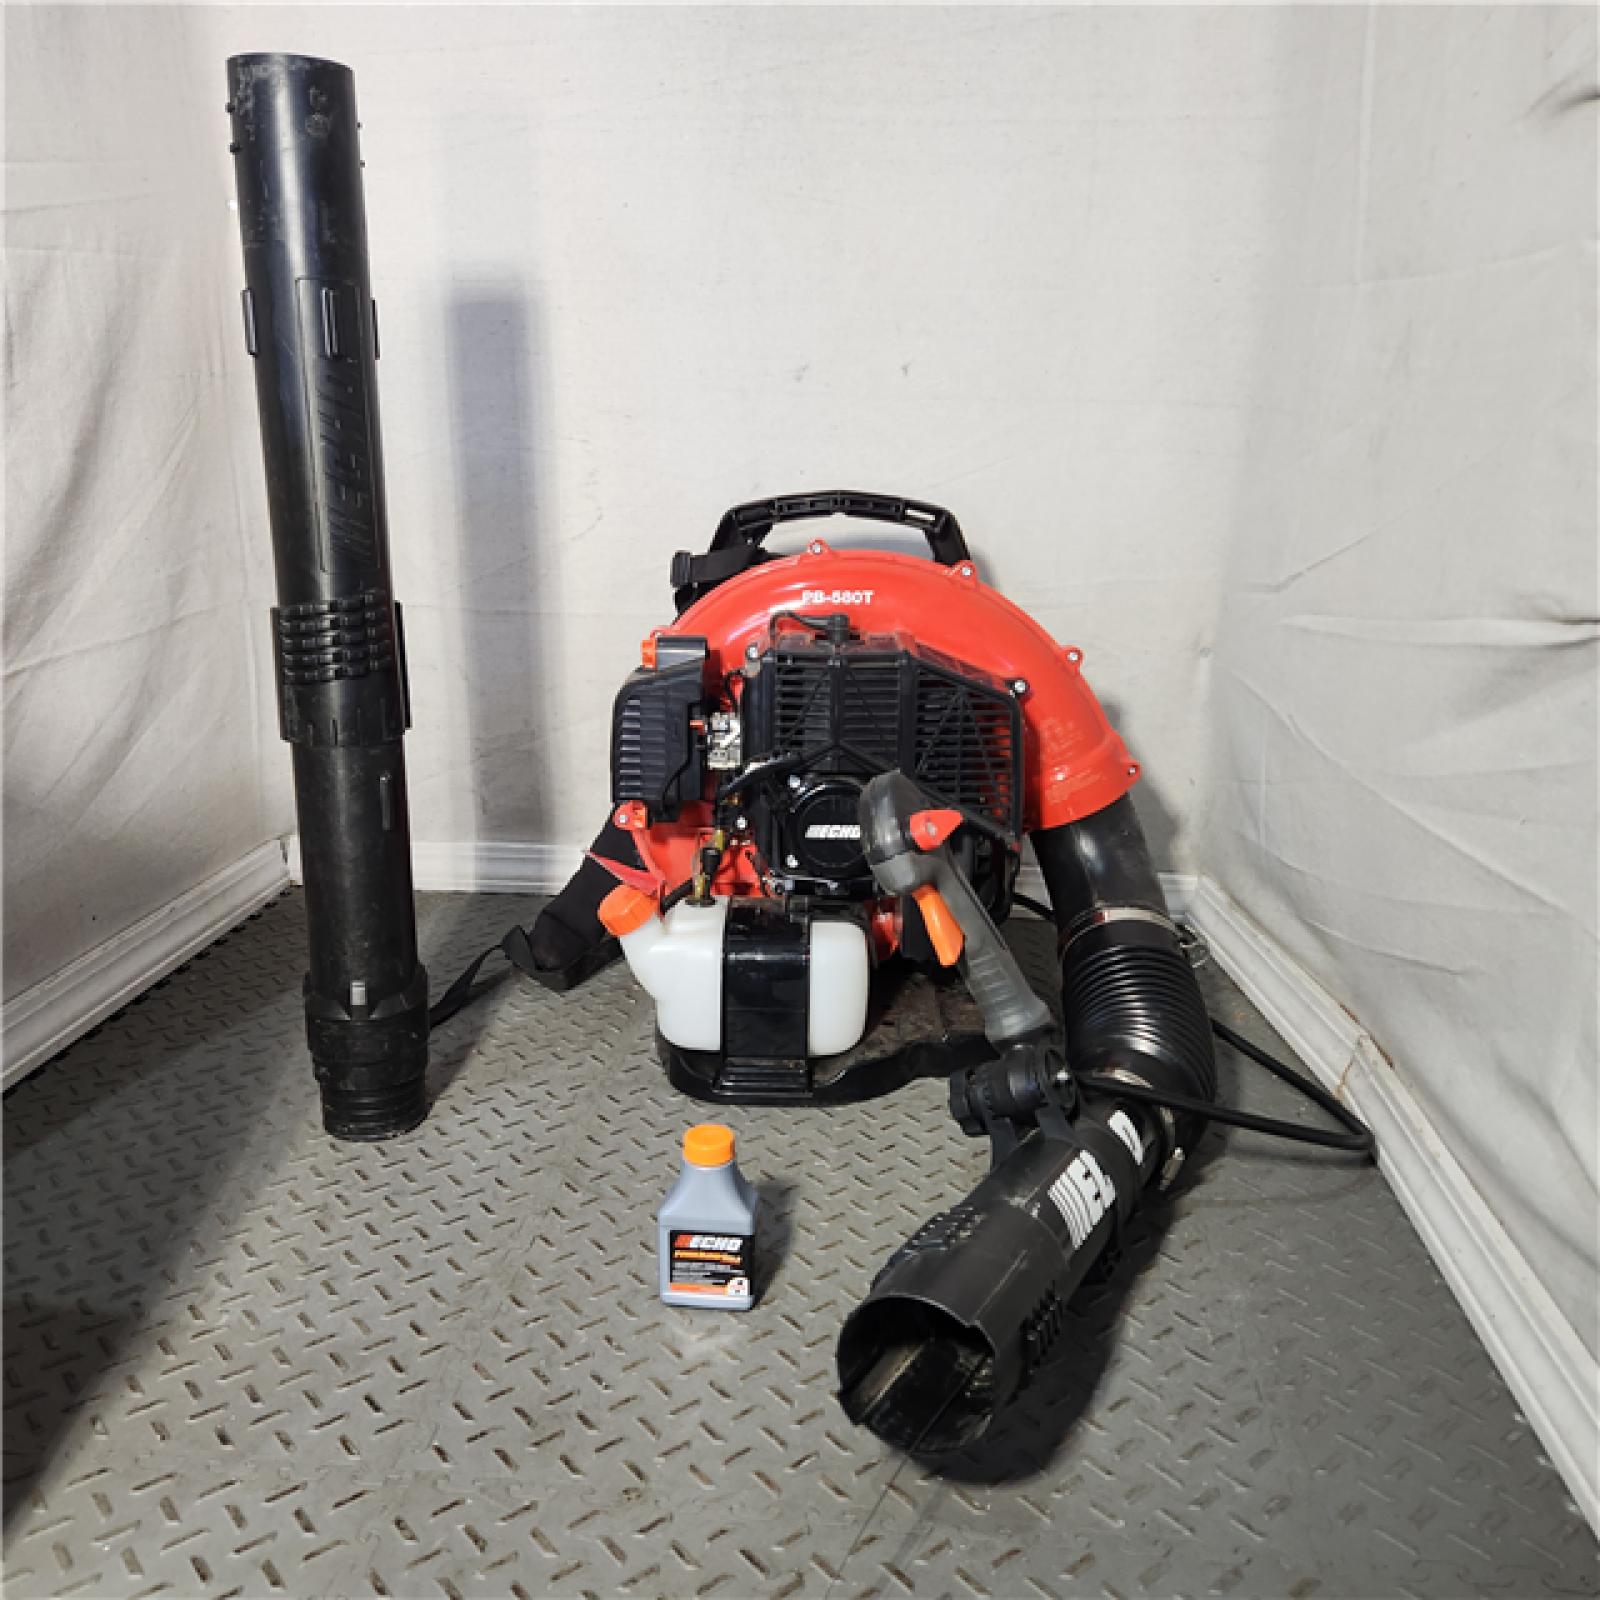 HOUSTON Location-AS-IS-ECHO 216 MPH 517 CFM 58.2cc Gas 2-Stroke Backpack Leaf Blower with Tube Throttle APPEARS IN GOOD Condition